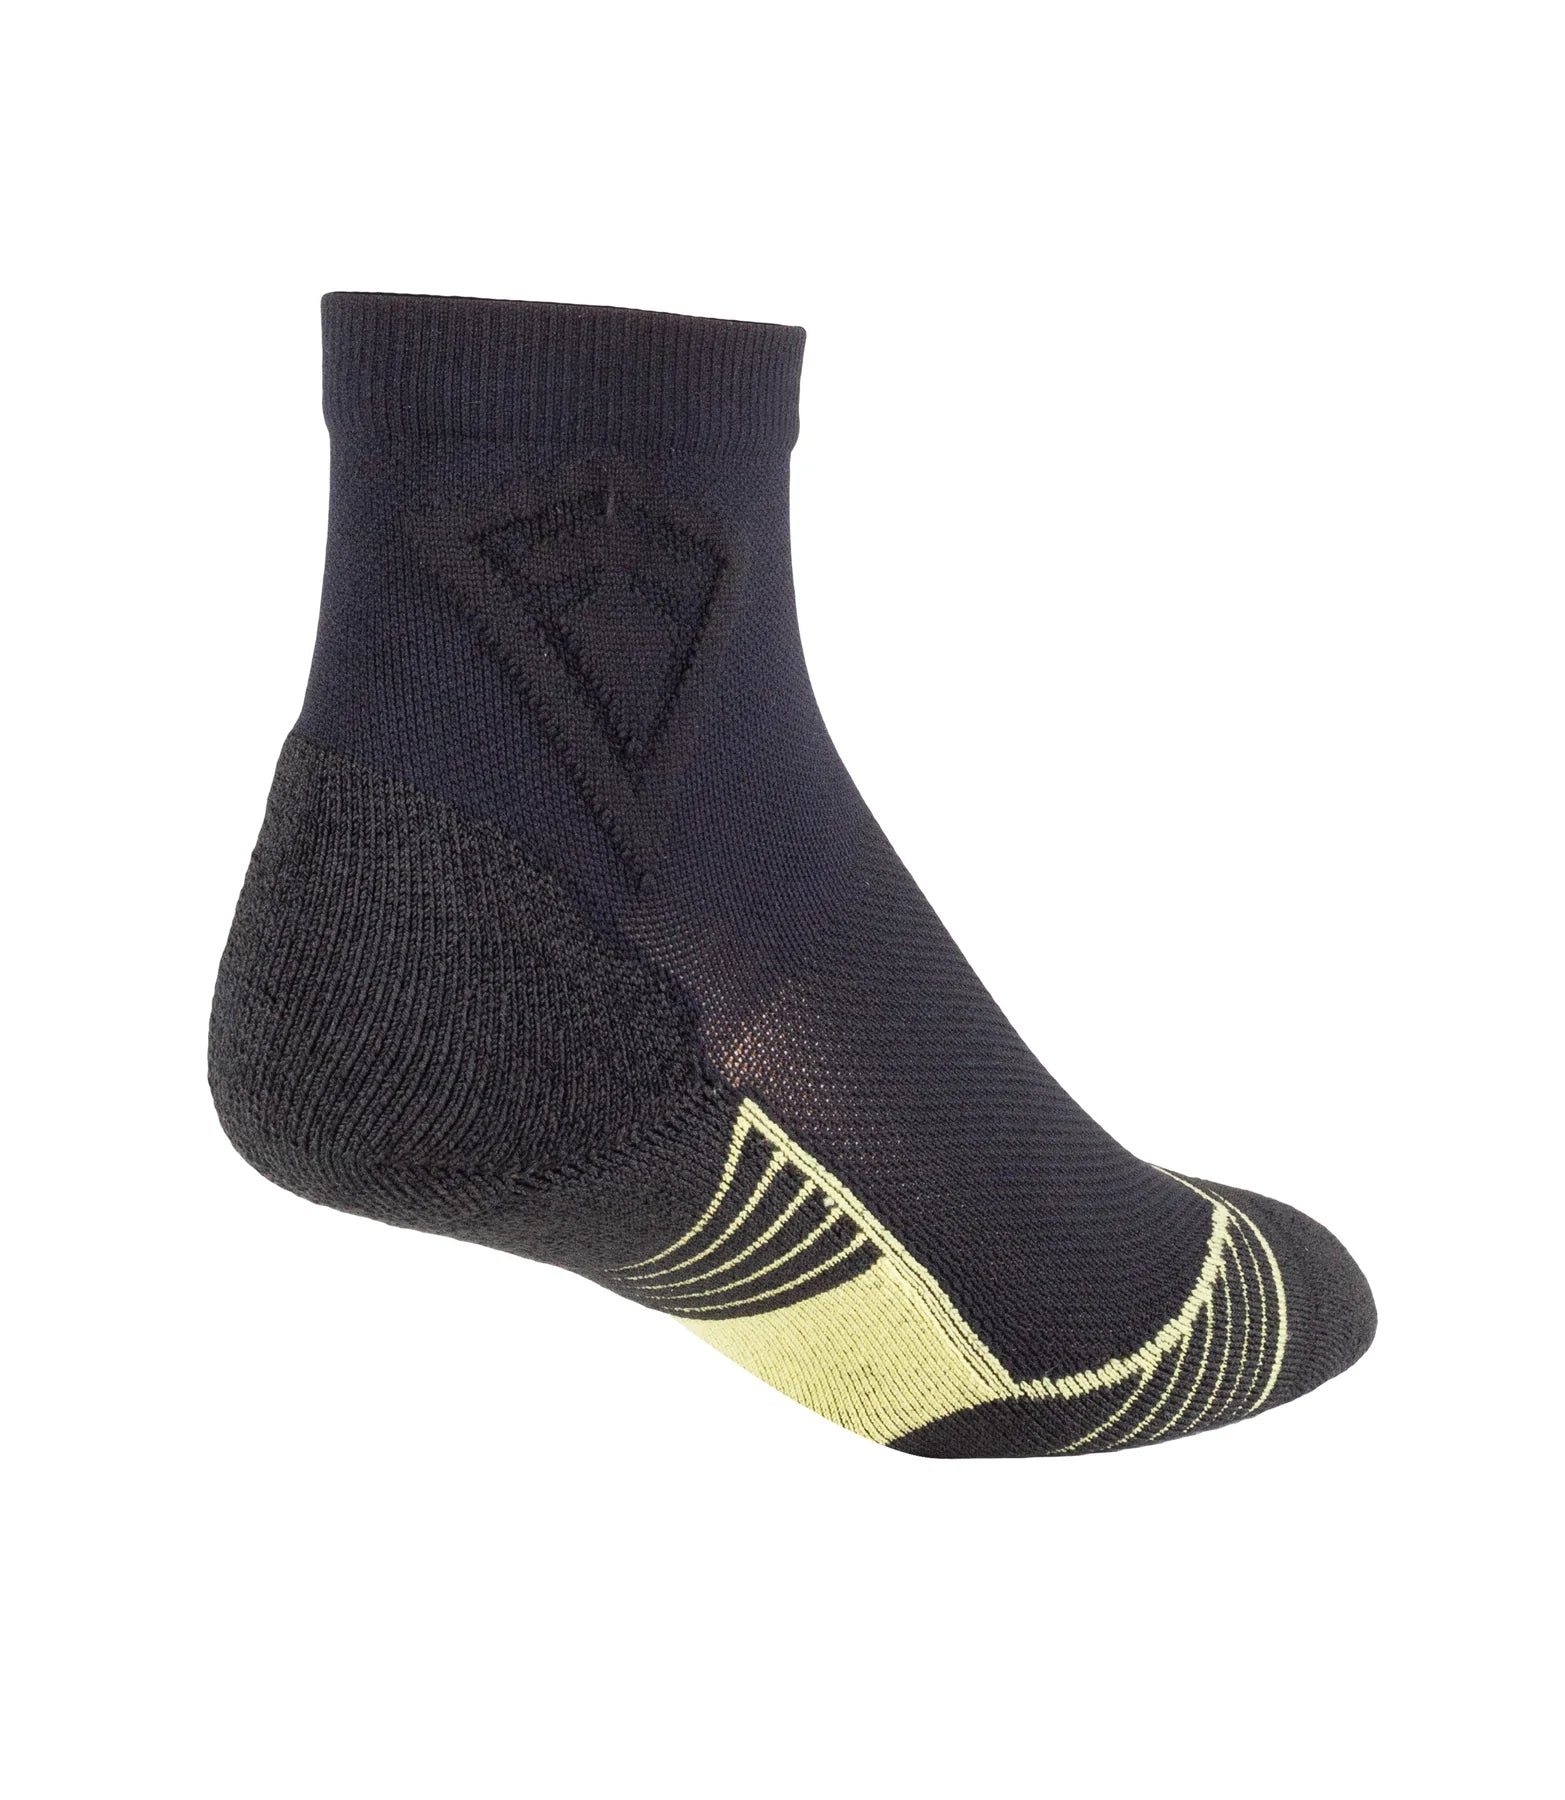 First Tactical Advanced Fit Low Cut Socks 160014 - Clothing & Accessories